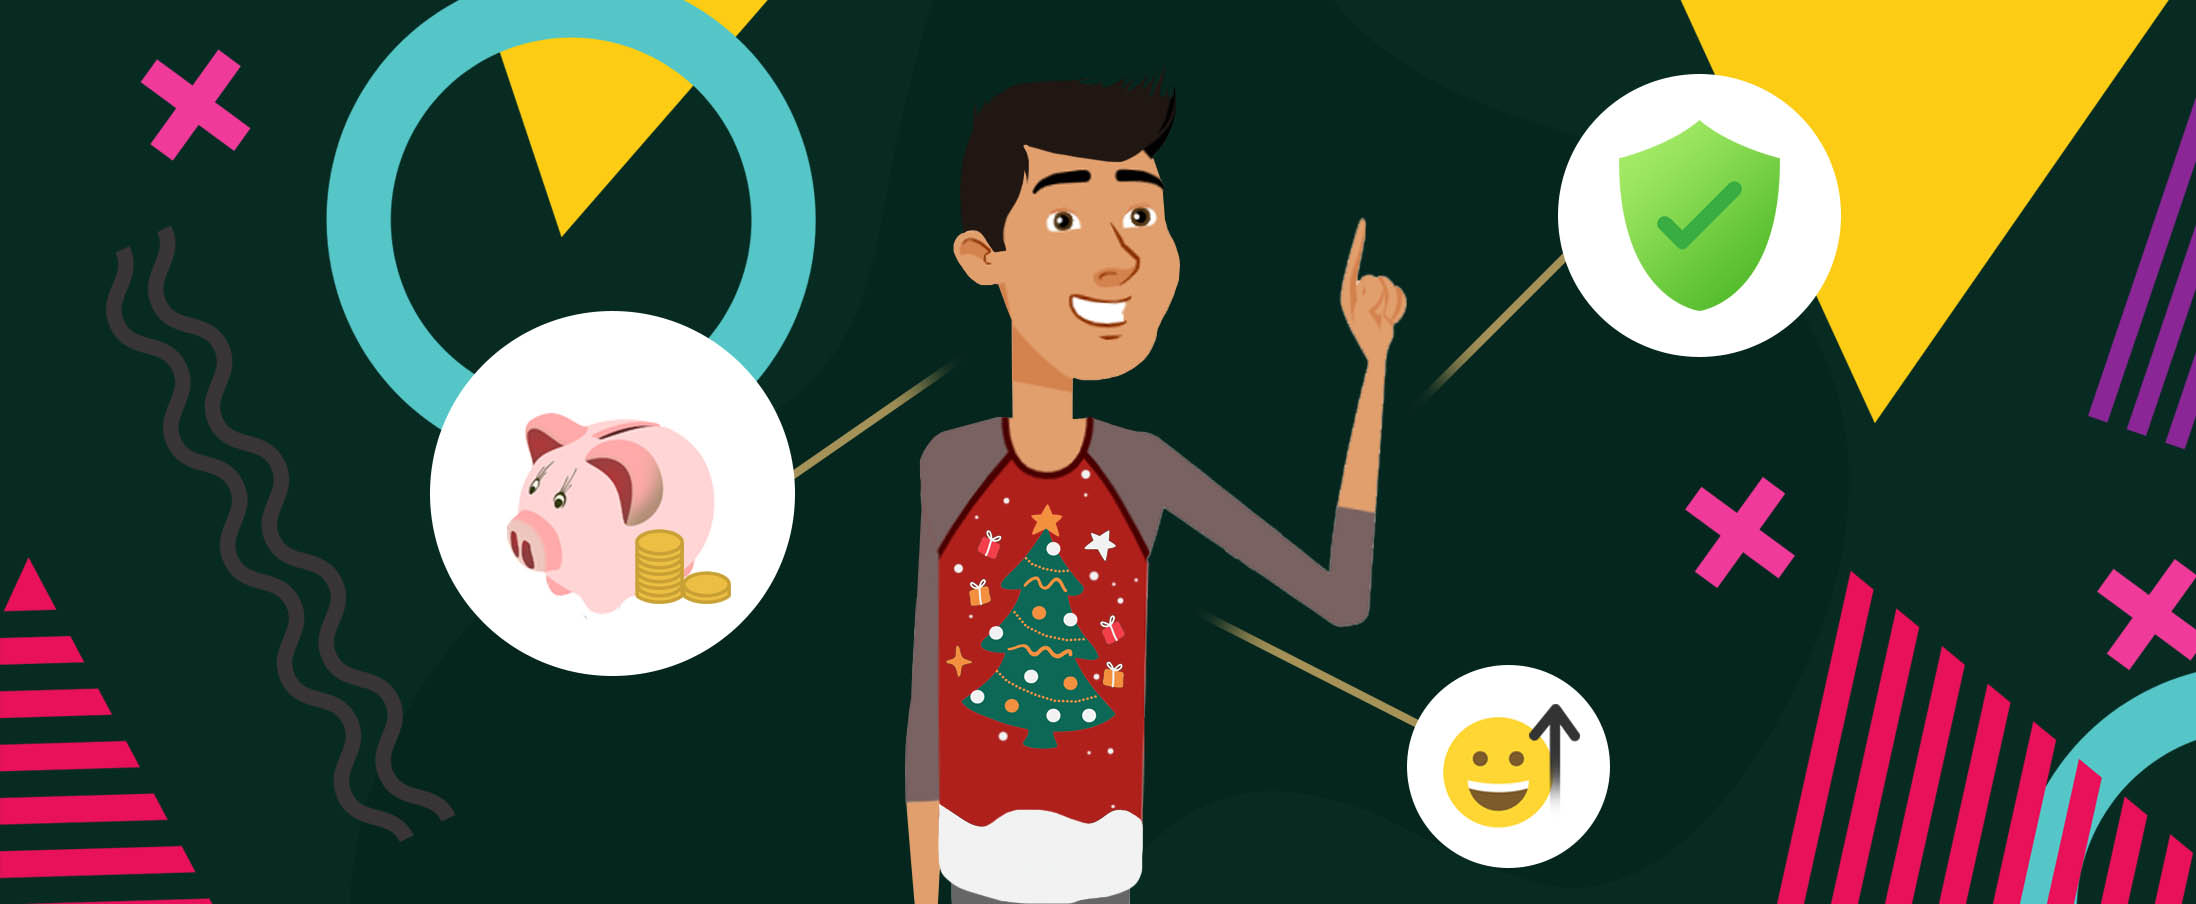 What Are the Benefits of Having an Online Christmas Party?